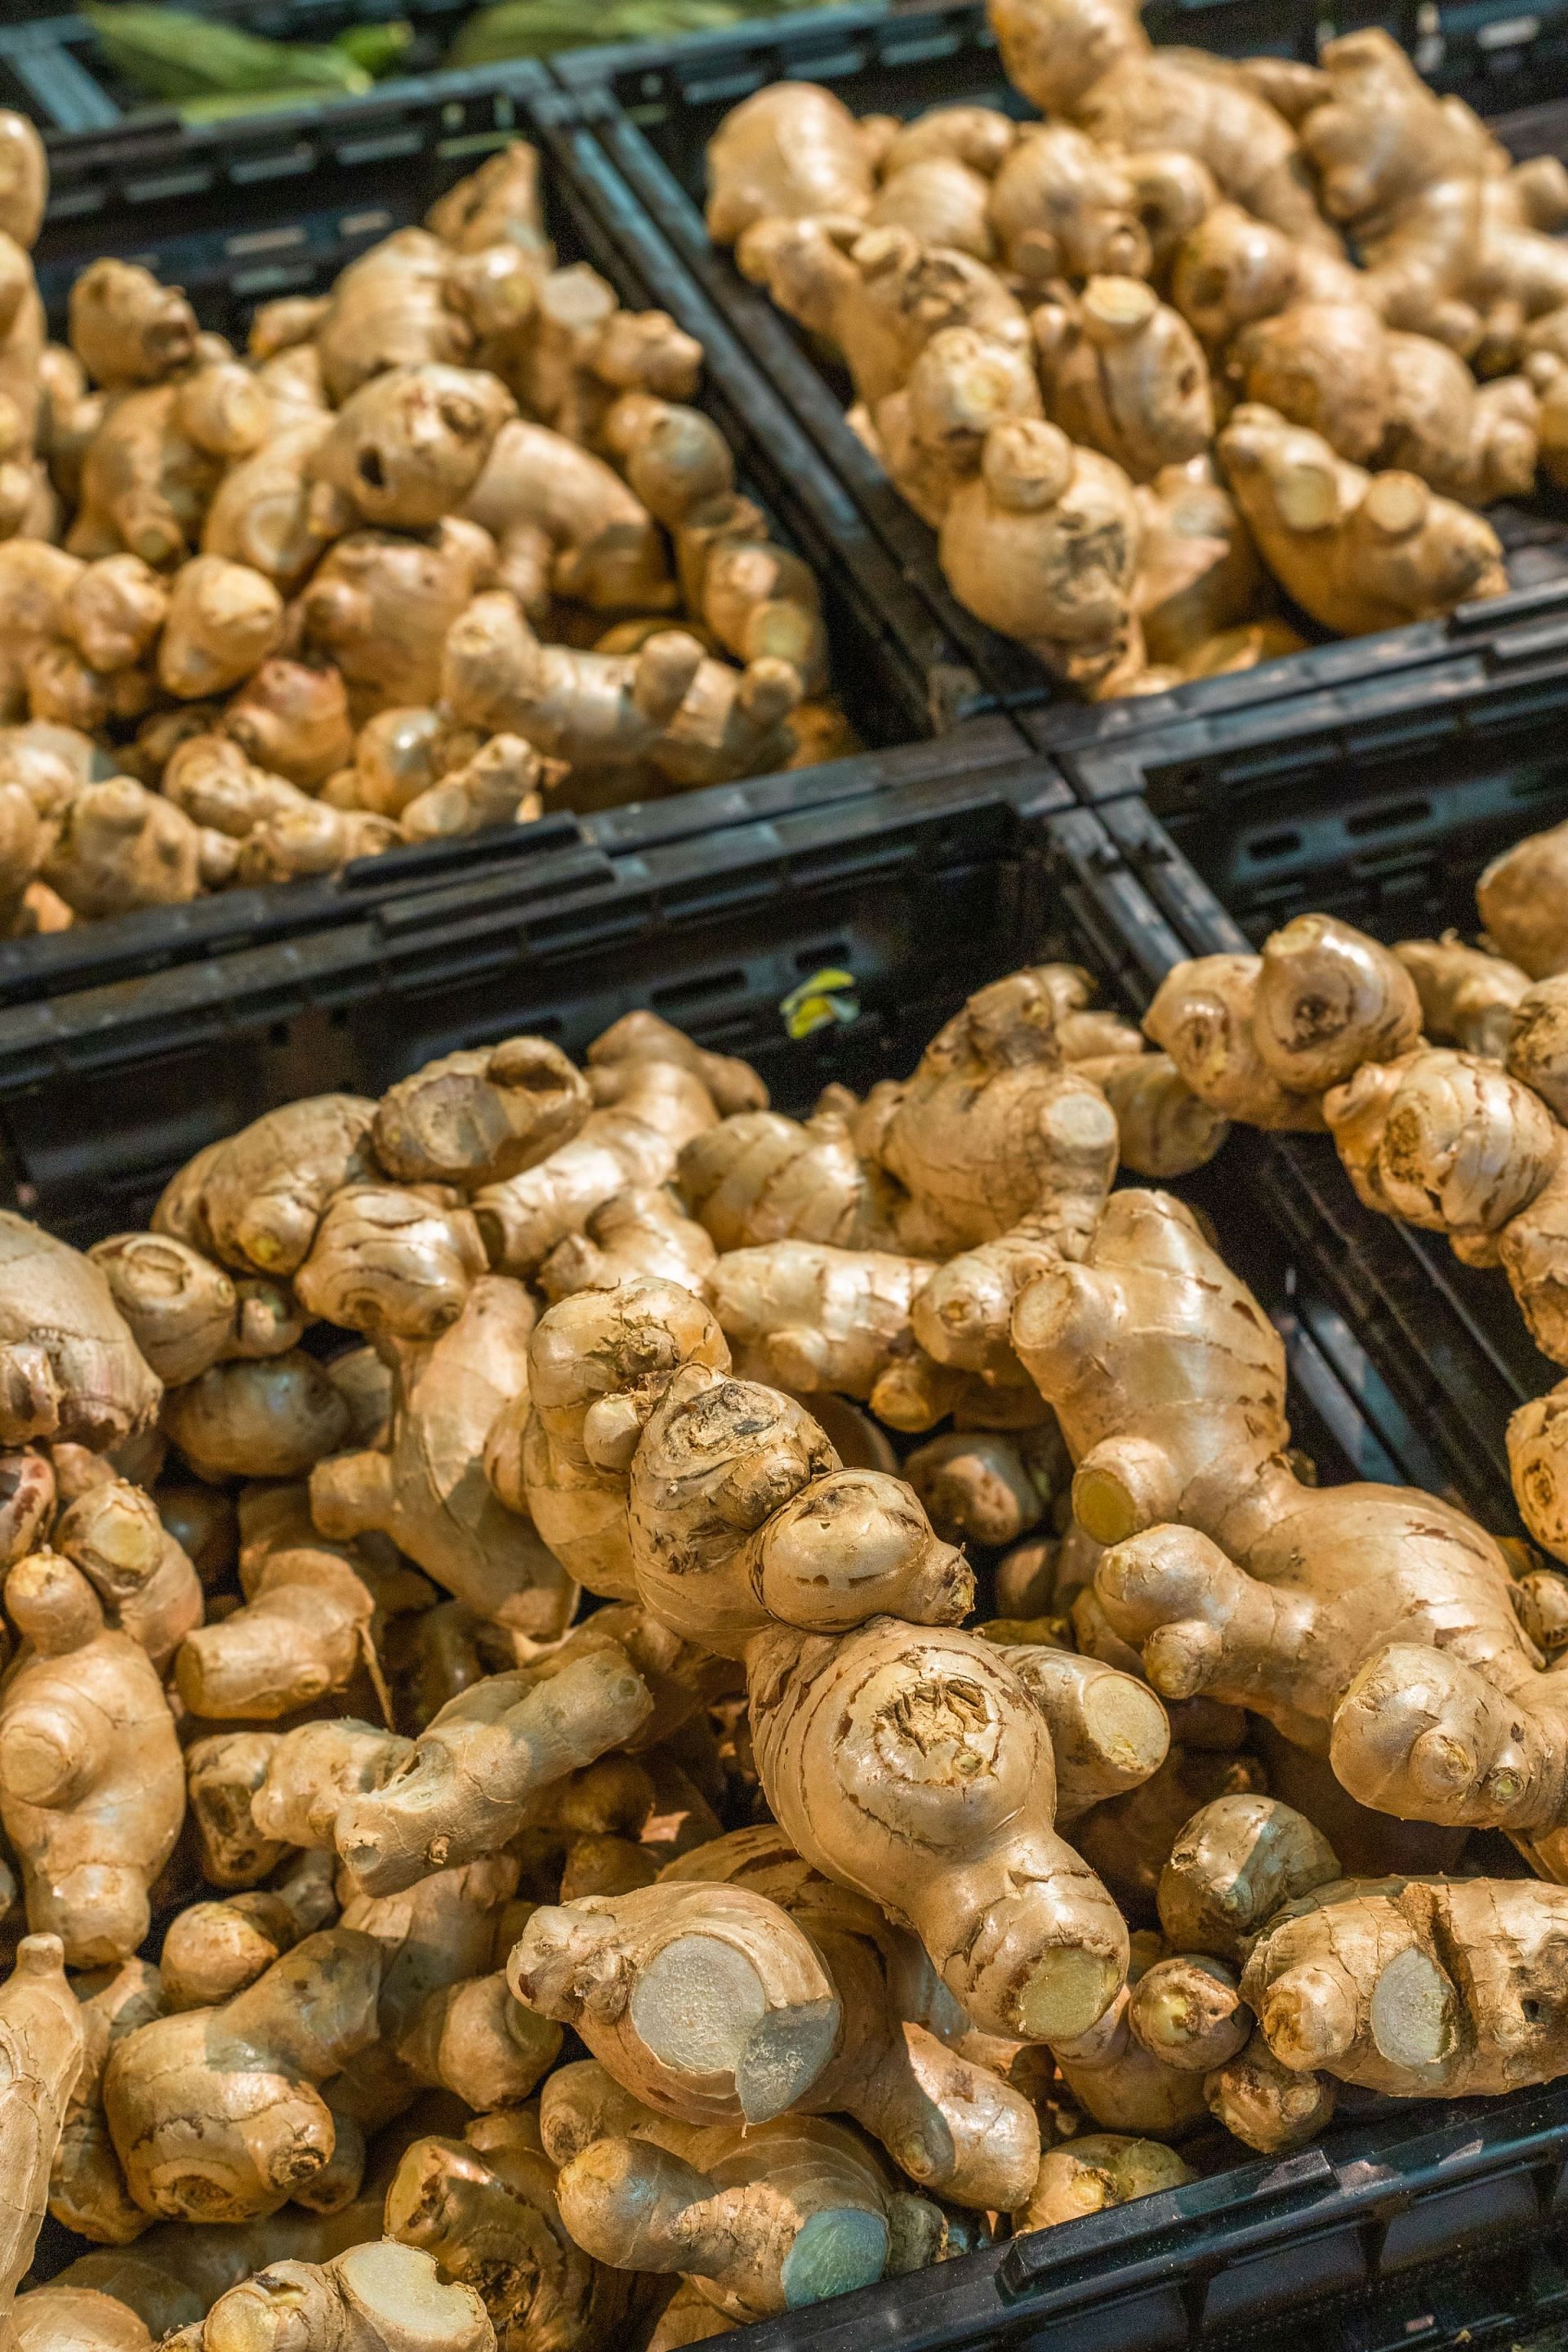 Always buy fresh and wrinkle-free ginger (Photo by Mitchell Luo on Unsplash)